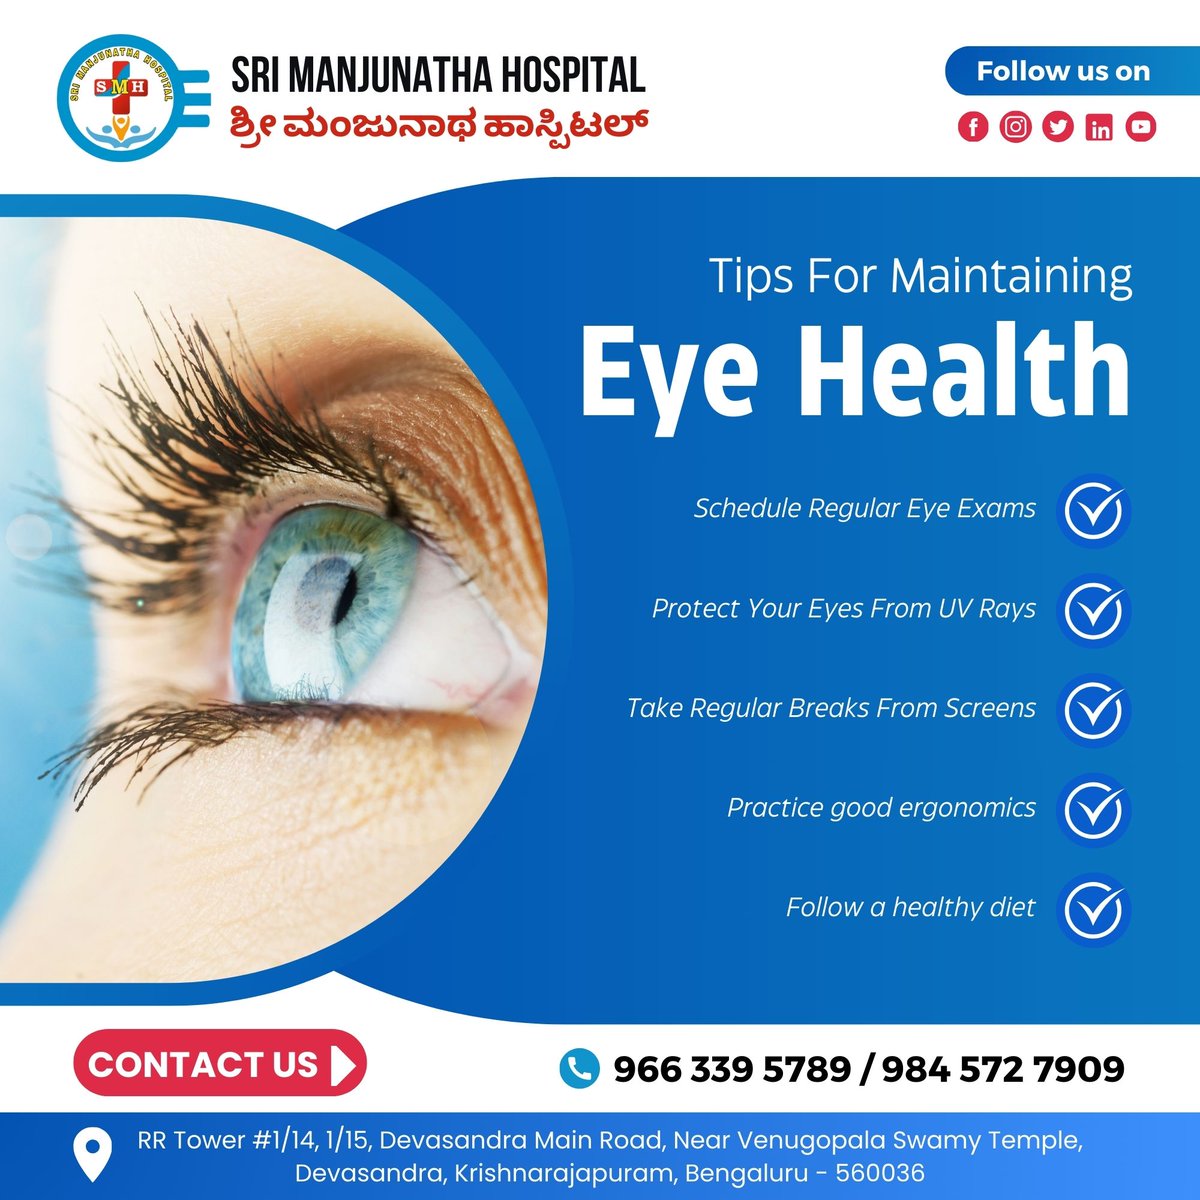 👀 Keep your eyes sparkling! Here are some essential tips for maintaining optimal eye health.

#EyeCare #HealthyEyes #VisionTips #eyecare #eyecaretips #eyehealthtips #BetterVision #takeabreak #eyemassage #drinkwater #uvprotection #srimanjunathahospital